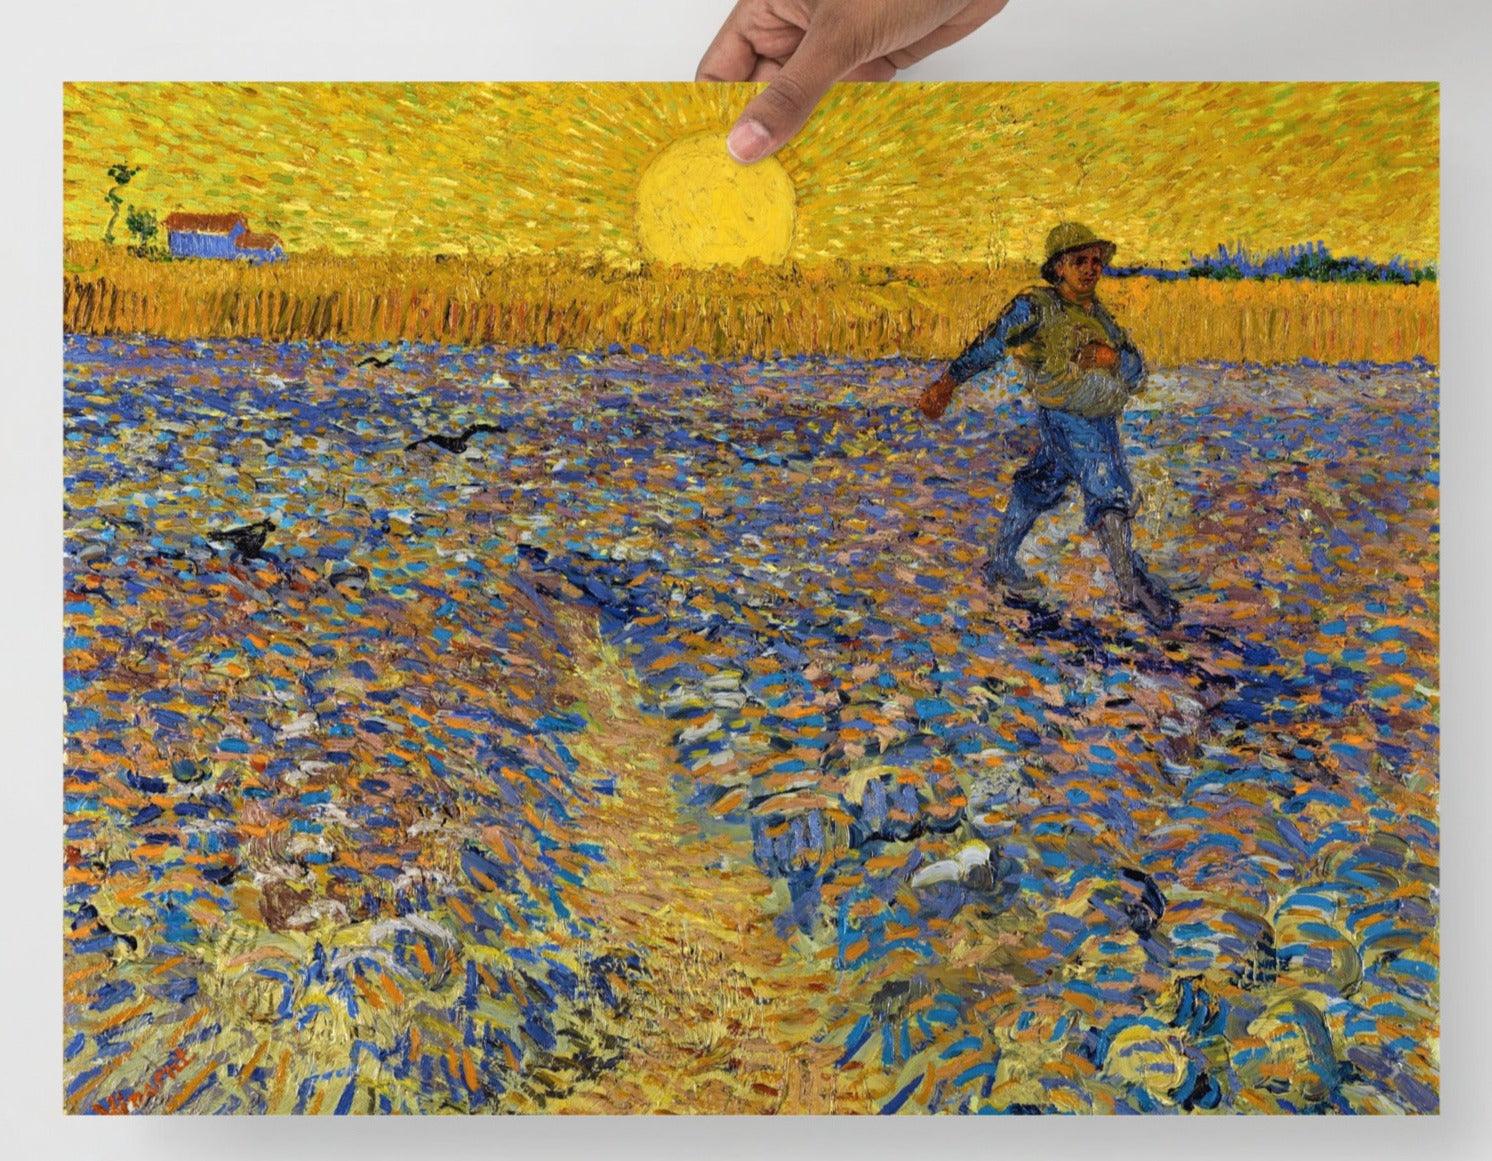 The Sower by Vincent Van Gogh poster on a plain backdrop in size18x24”.